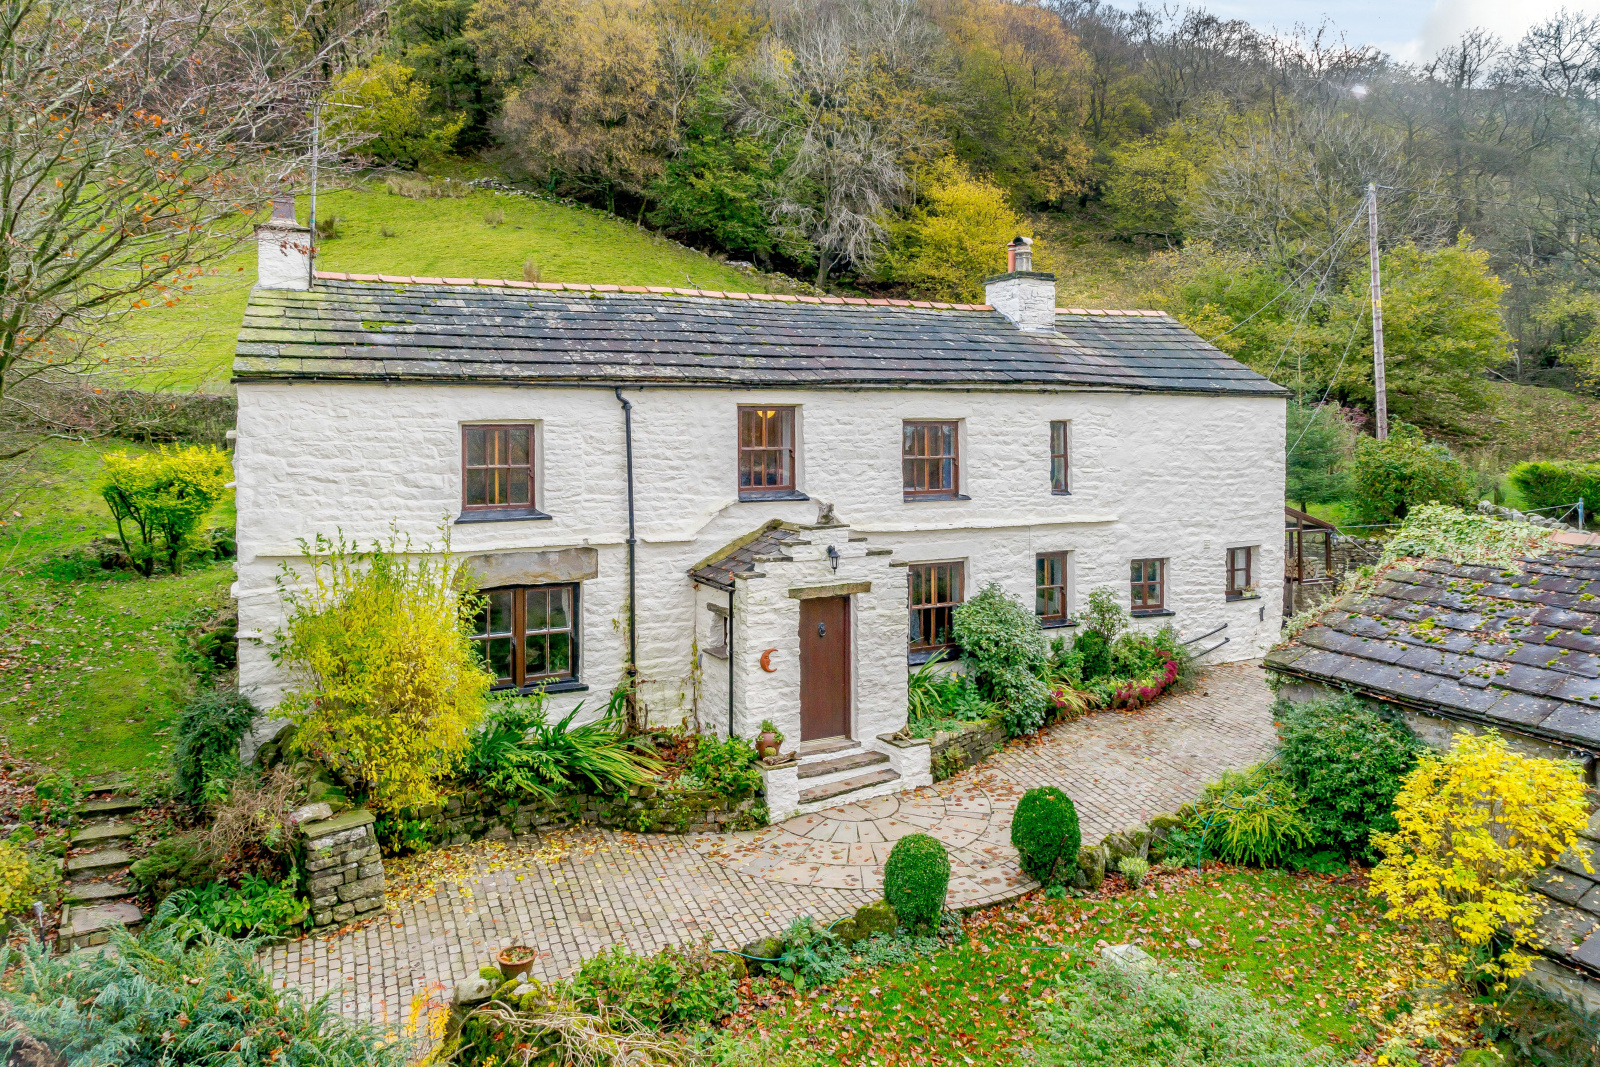 Grade II Listed 18th century historical farmhouse and longhouse in UK countryside